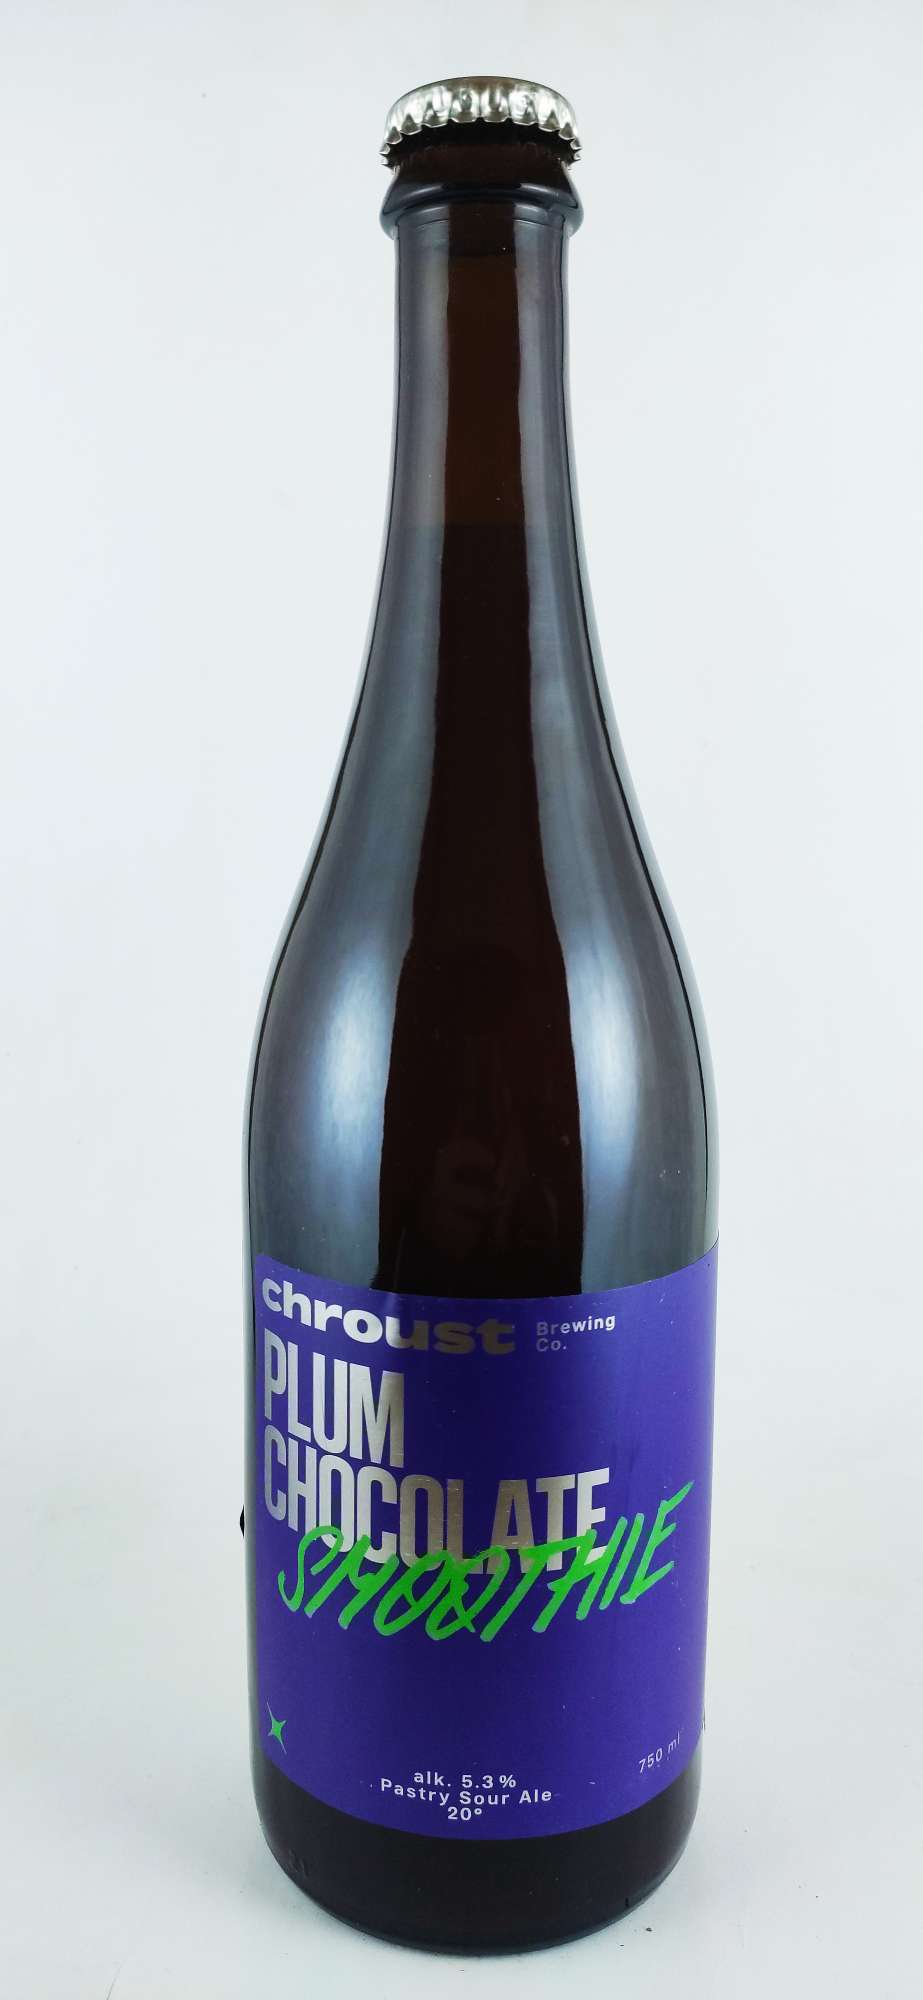 Chroust Plum Chocolate Smoothie Pastry Sour Ale 20°